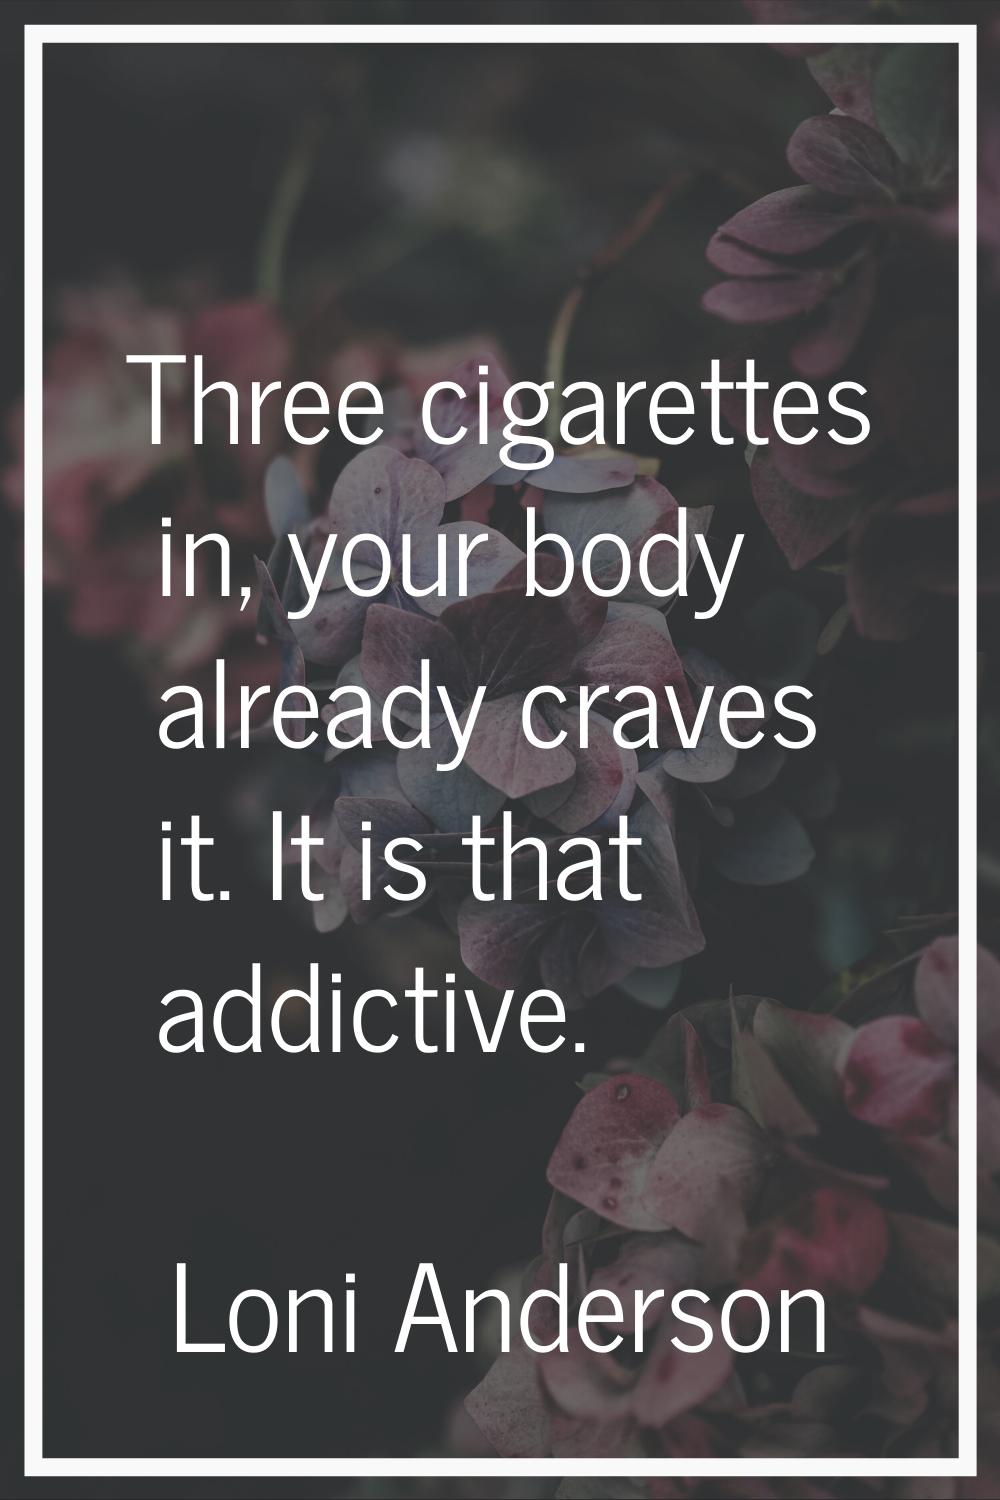 Three cigarettes in, your body already craves it. It is that addictive.